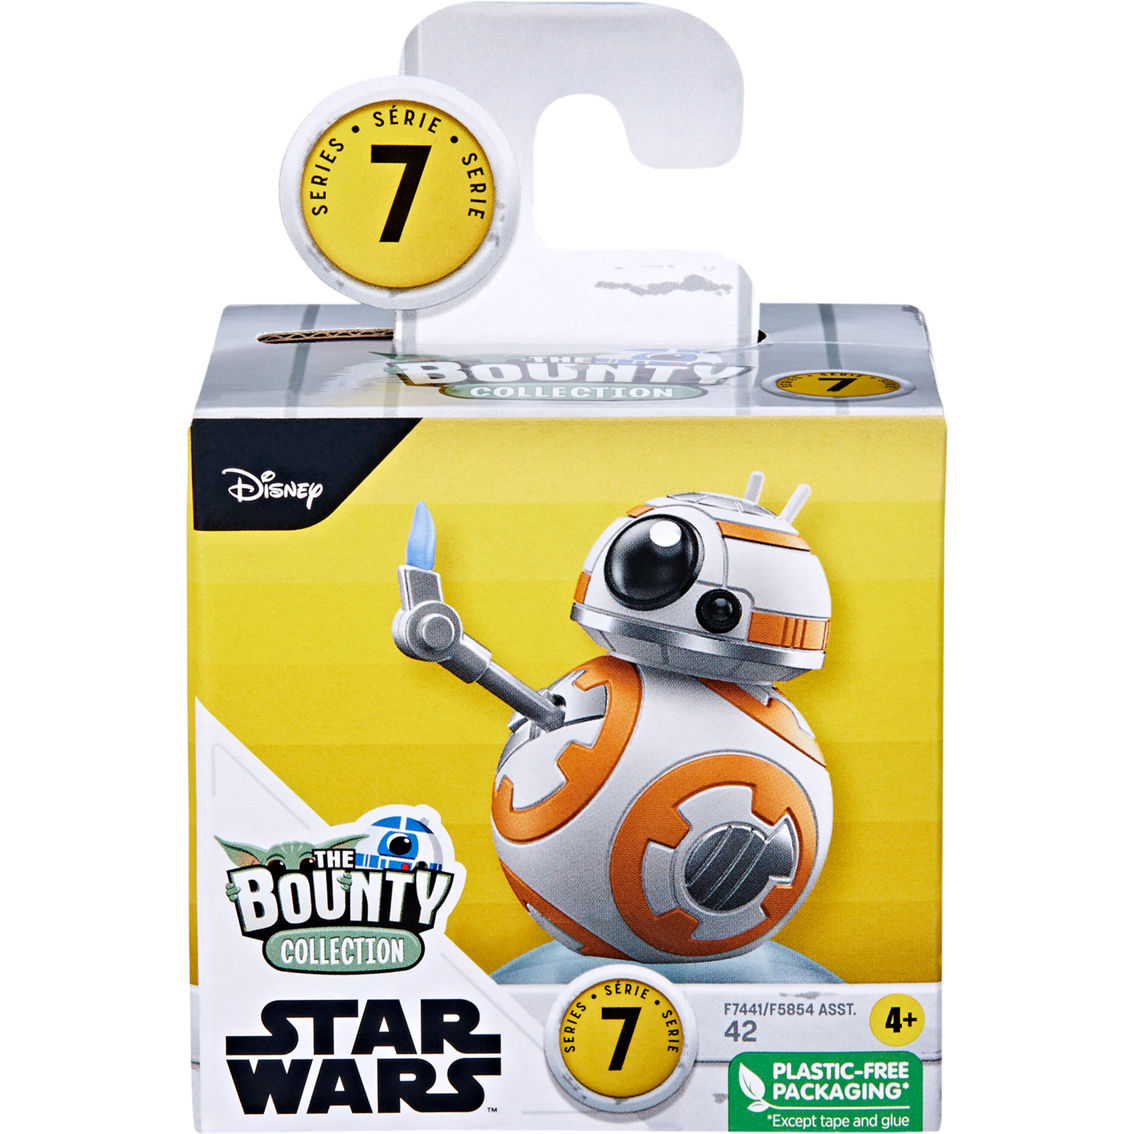 Star Wars Bounty Collection Mini Action Figure, BB-8 - Image 2 of 3